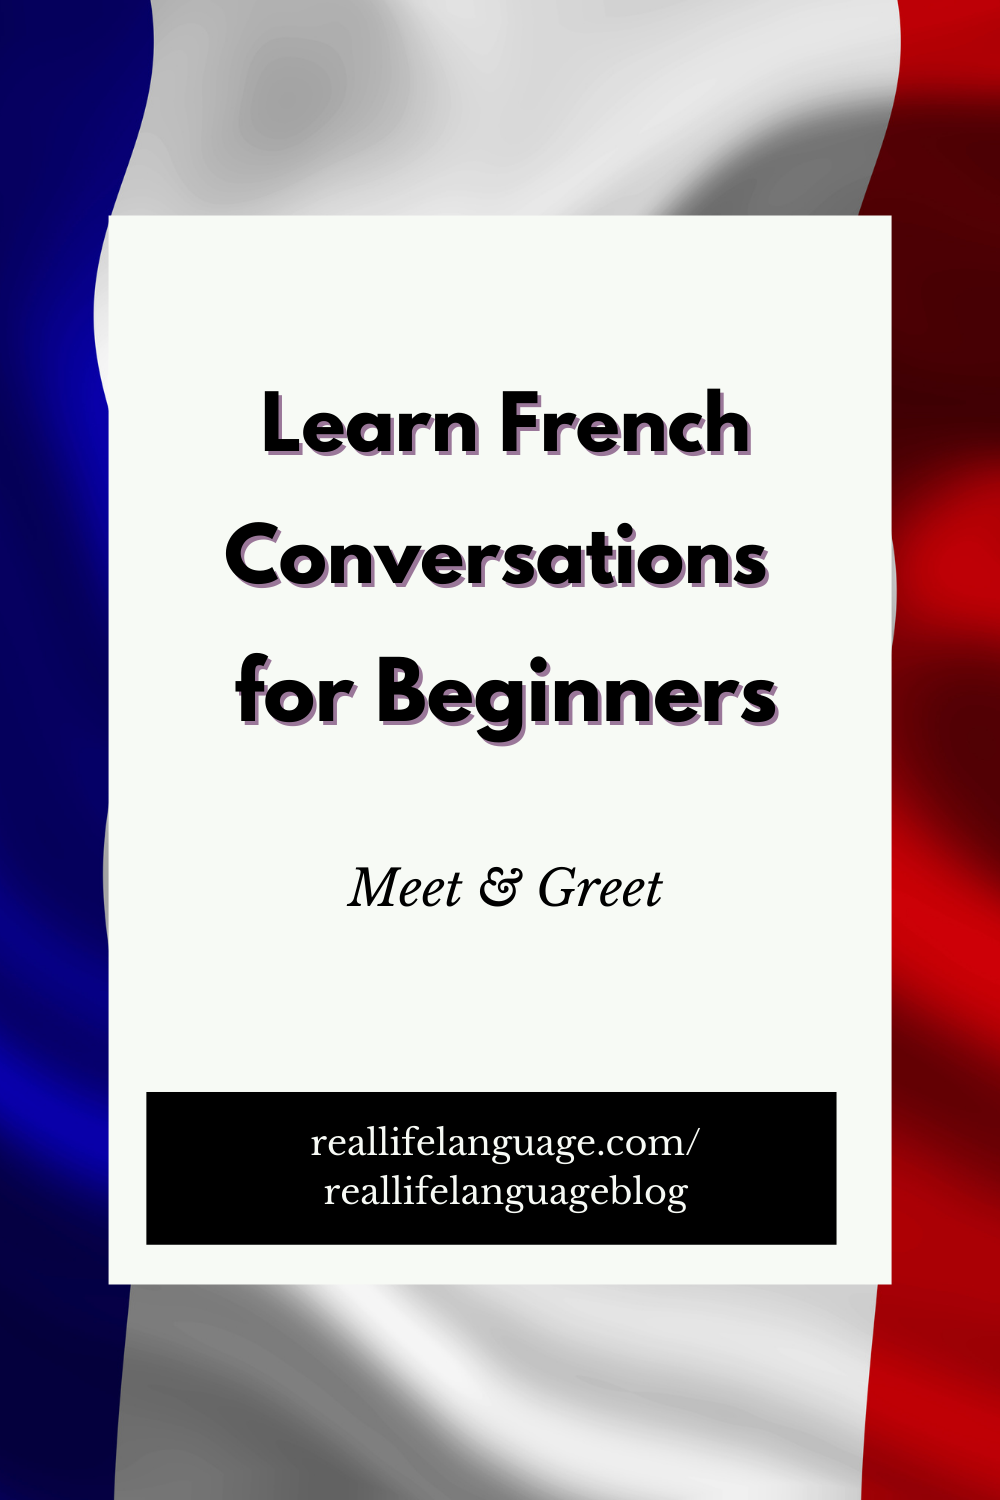 Learn French conversations for beginners